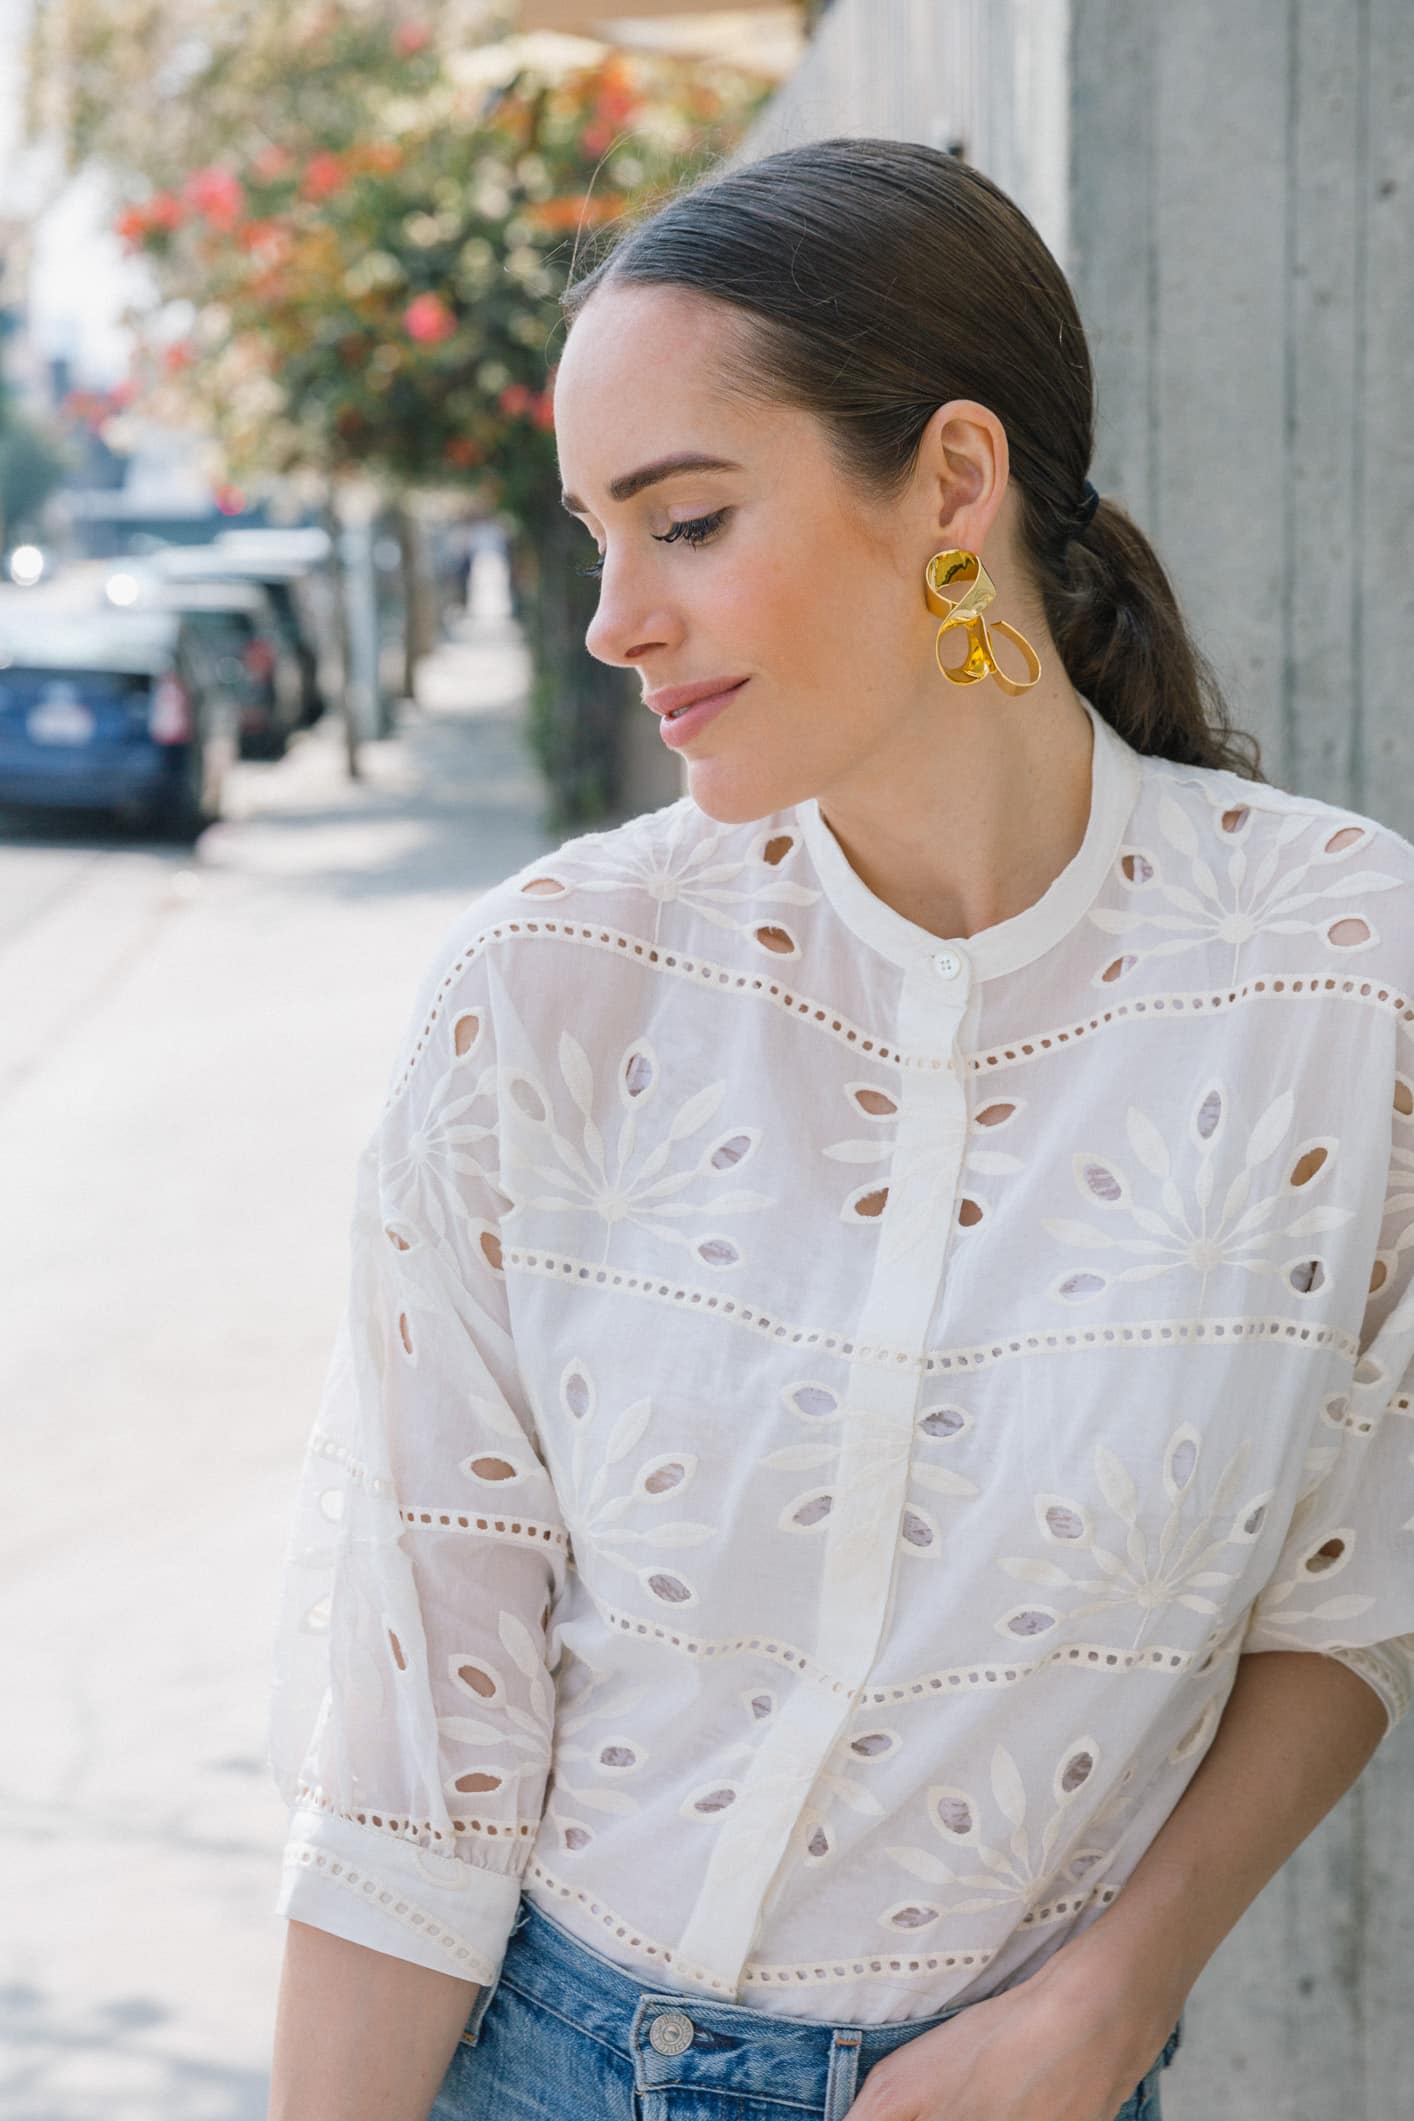 Louise Roe gives fashion advice on what to wear when you meet the parents